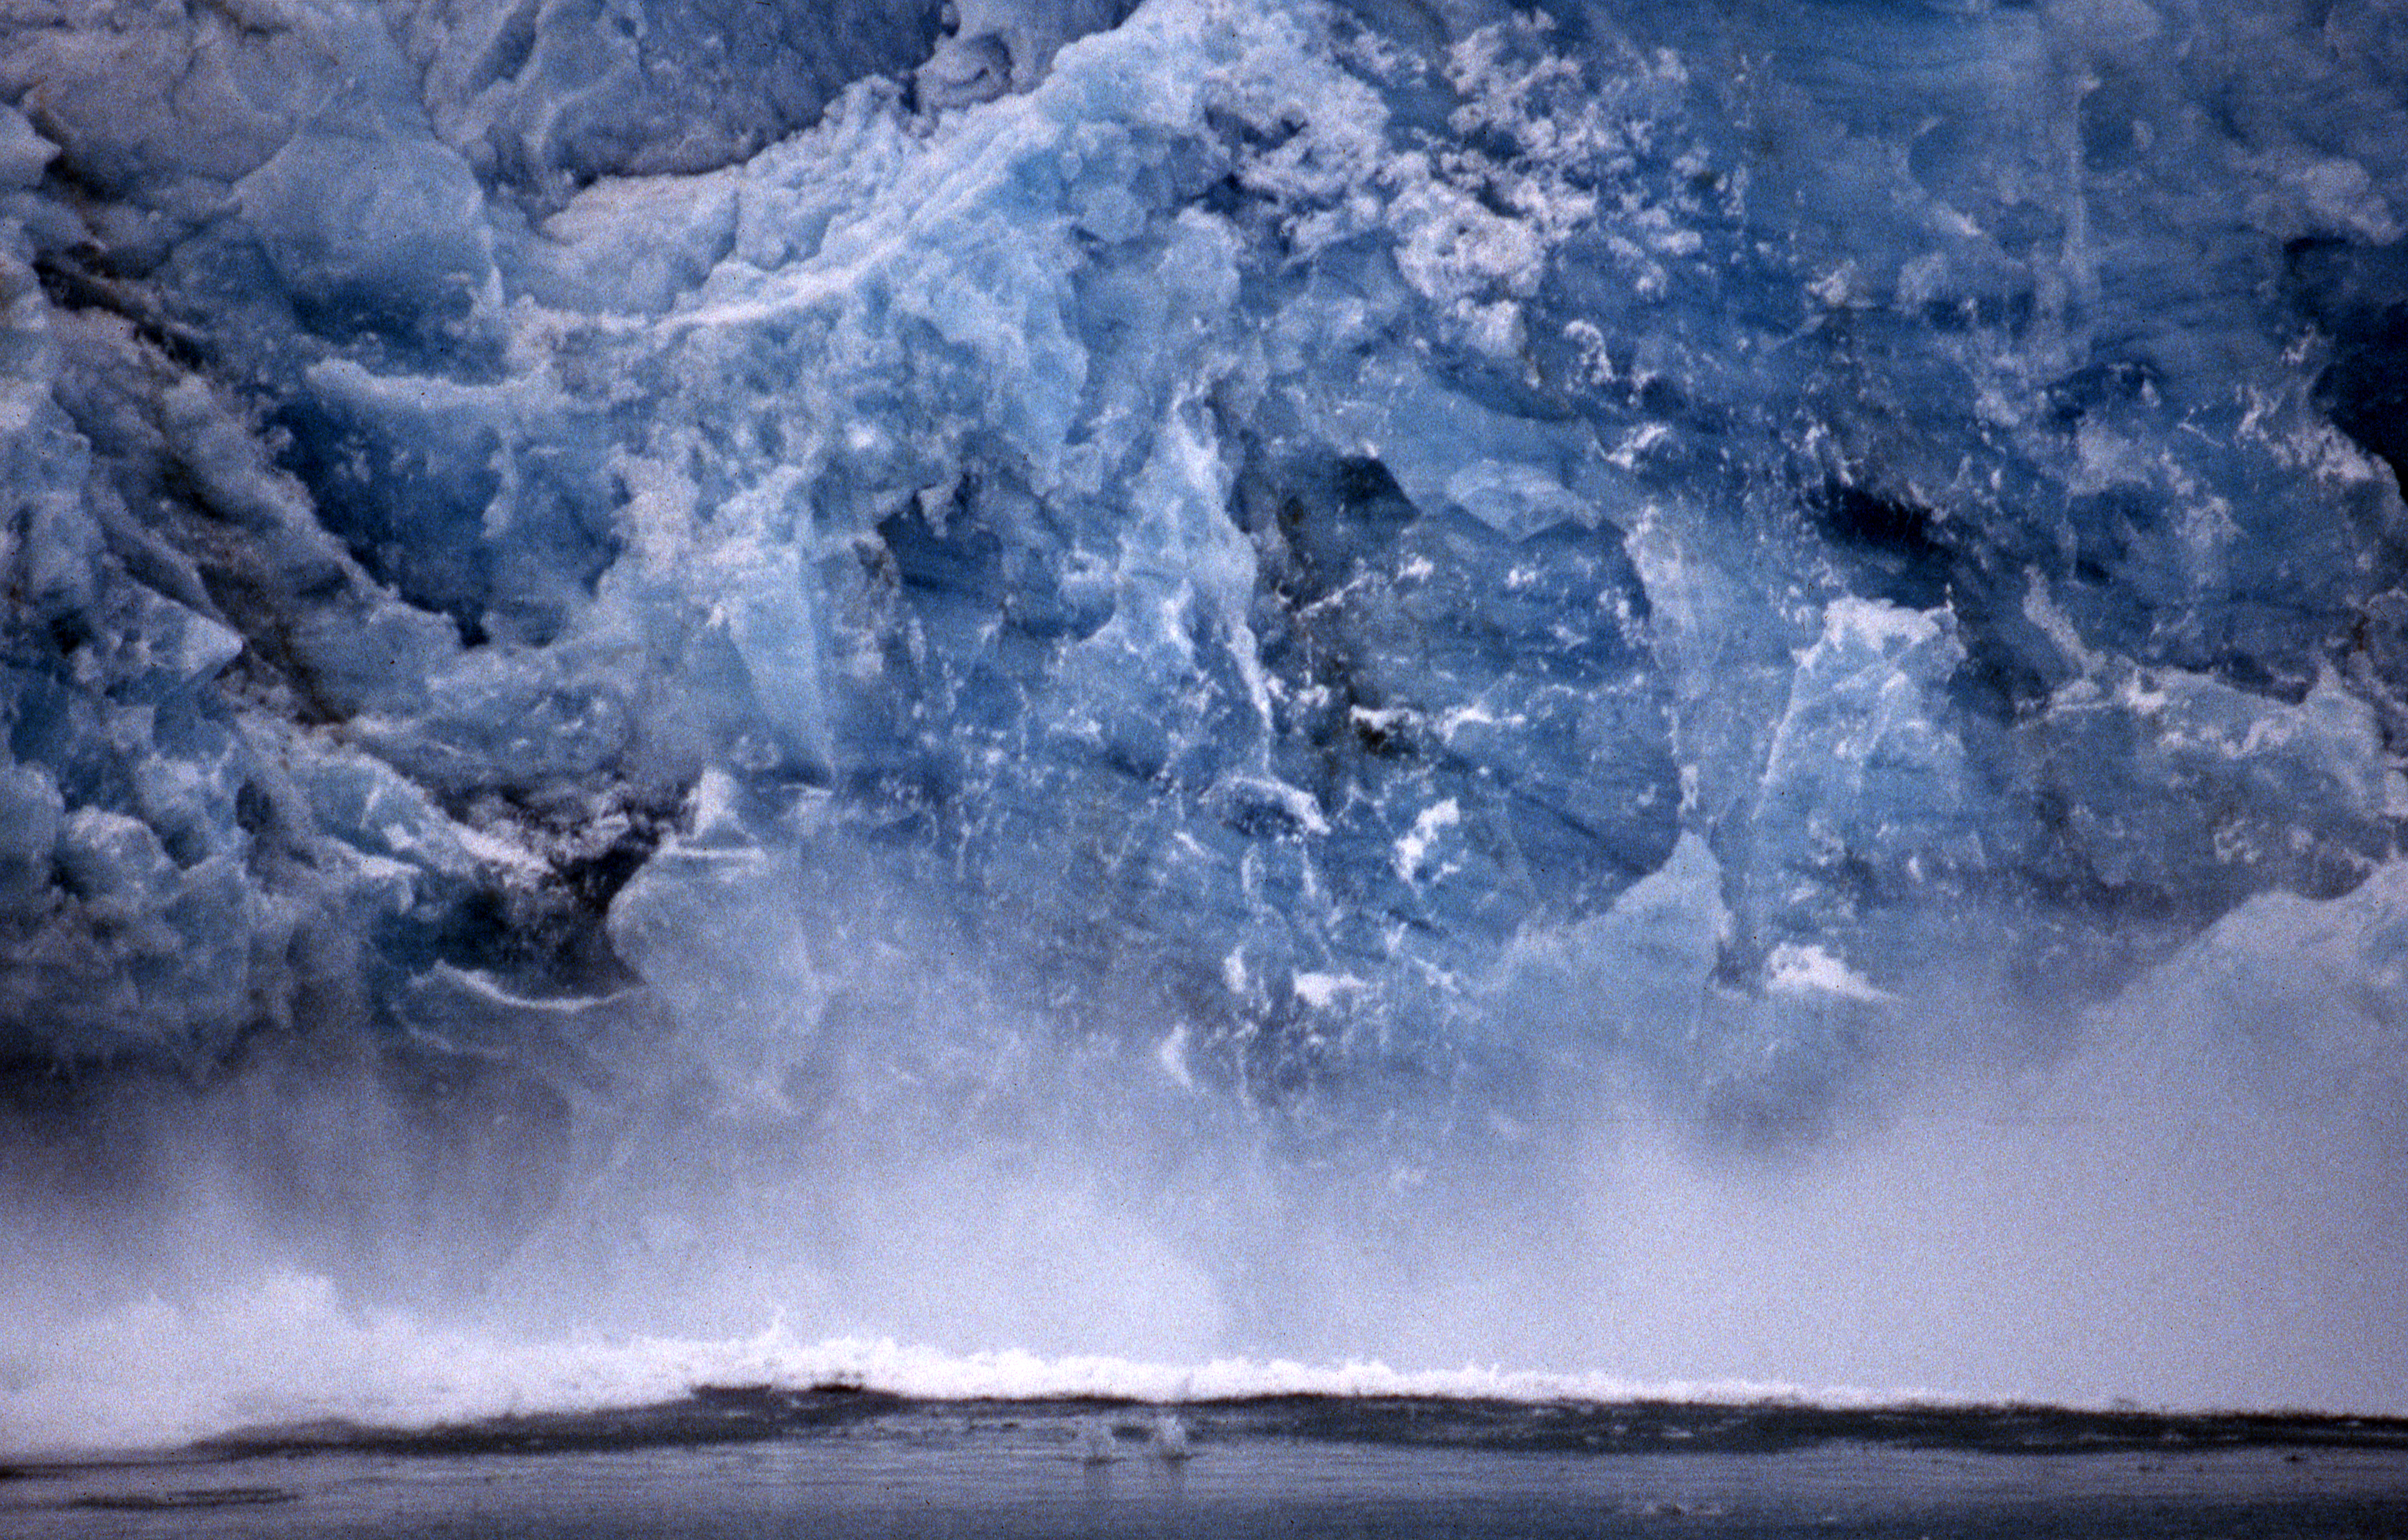 Ice blocks falling from a glacier front in Svalbard | GRID-Arendal